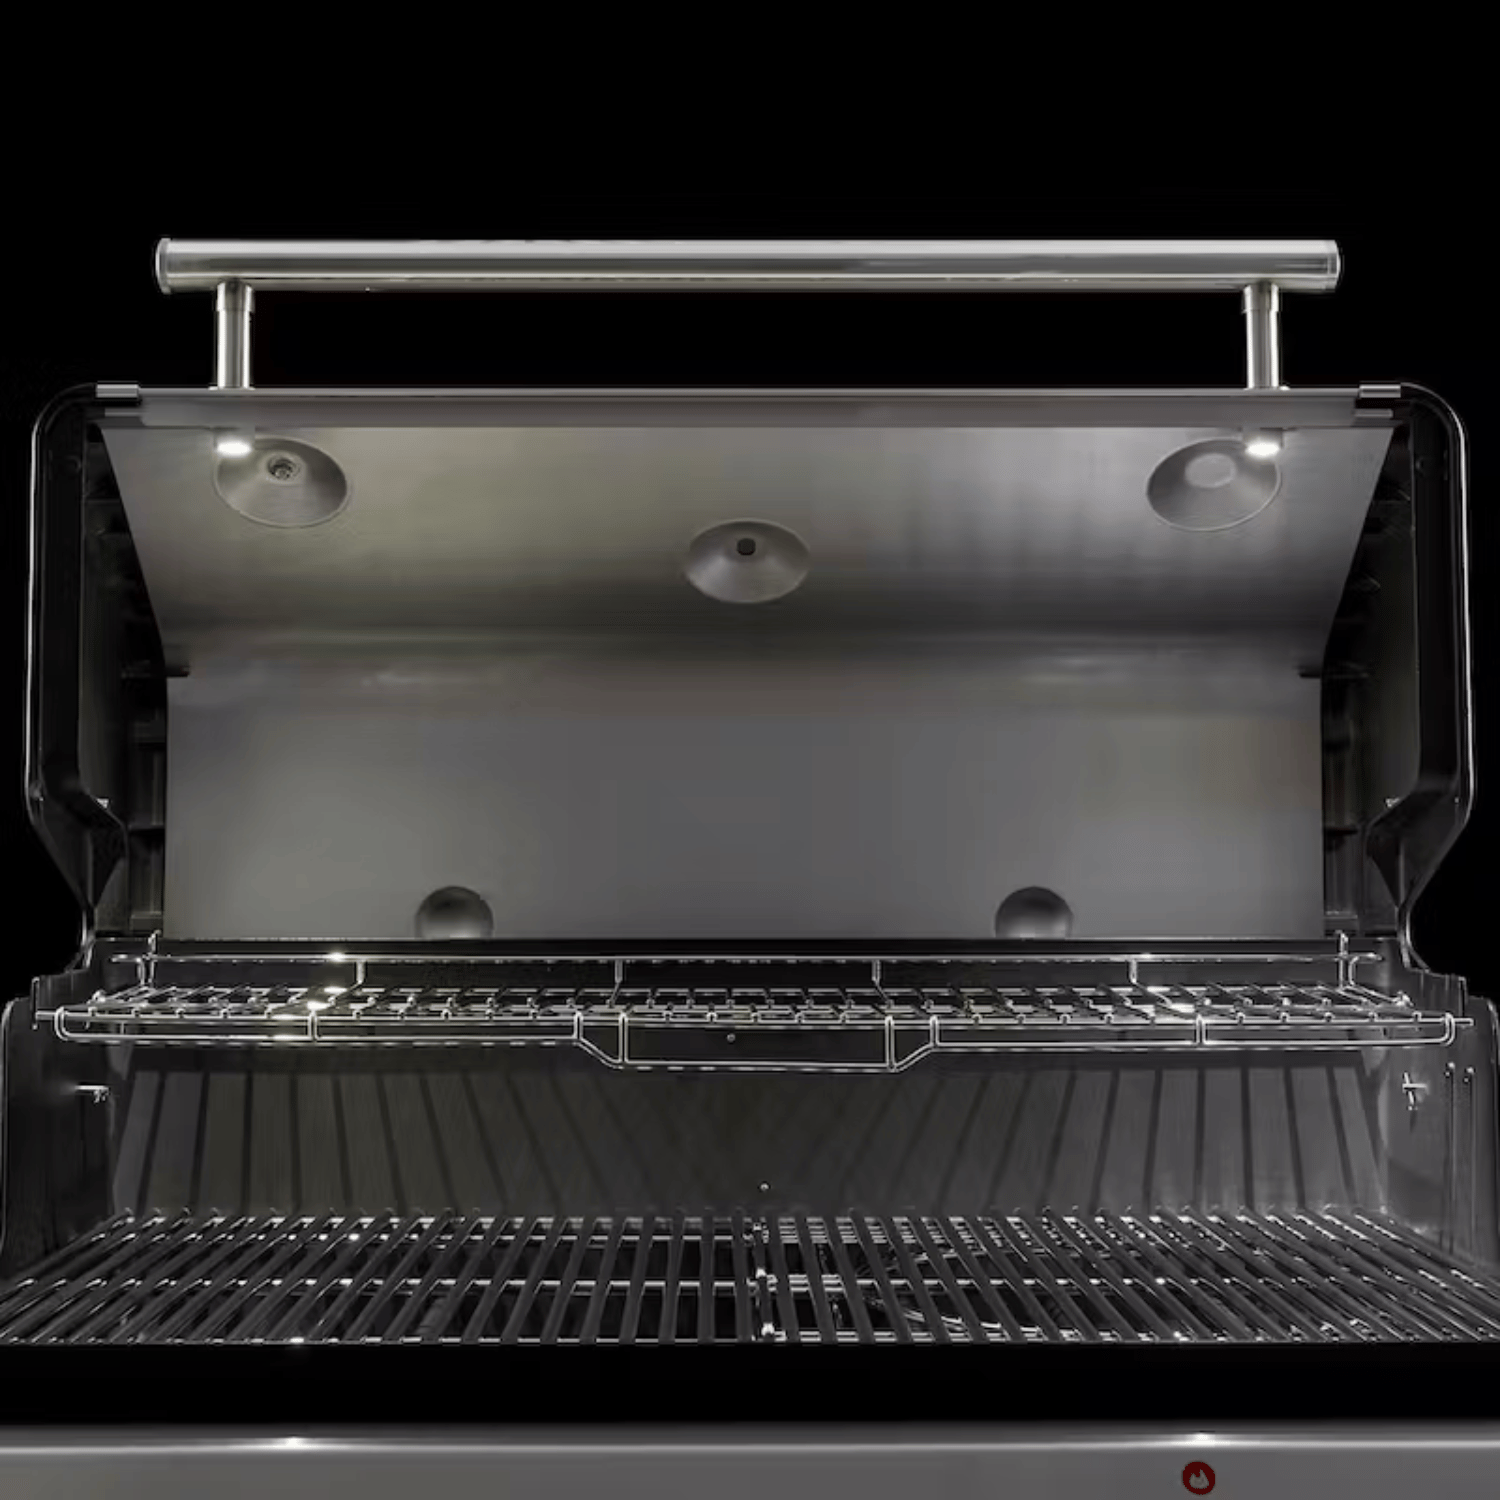 Weber Genesis SE-SPX-435 Smart Grill available at MeatKing.hk1